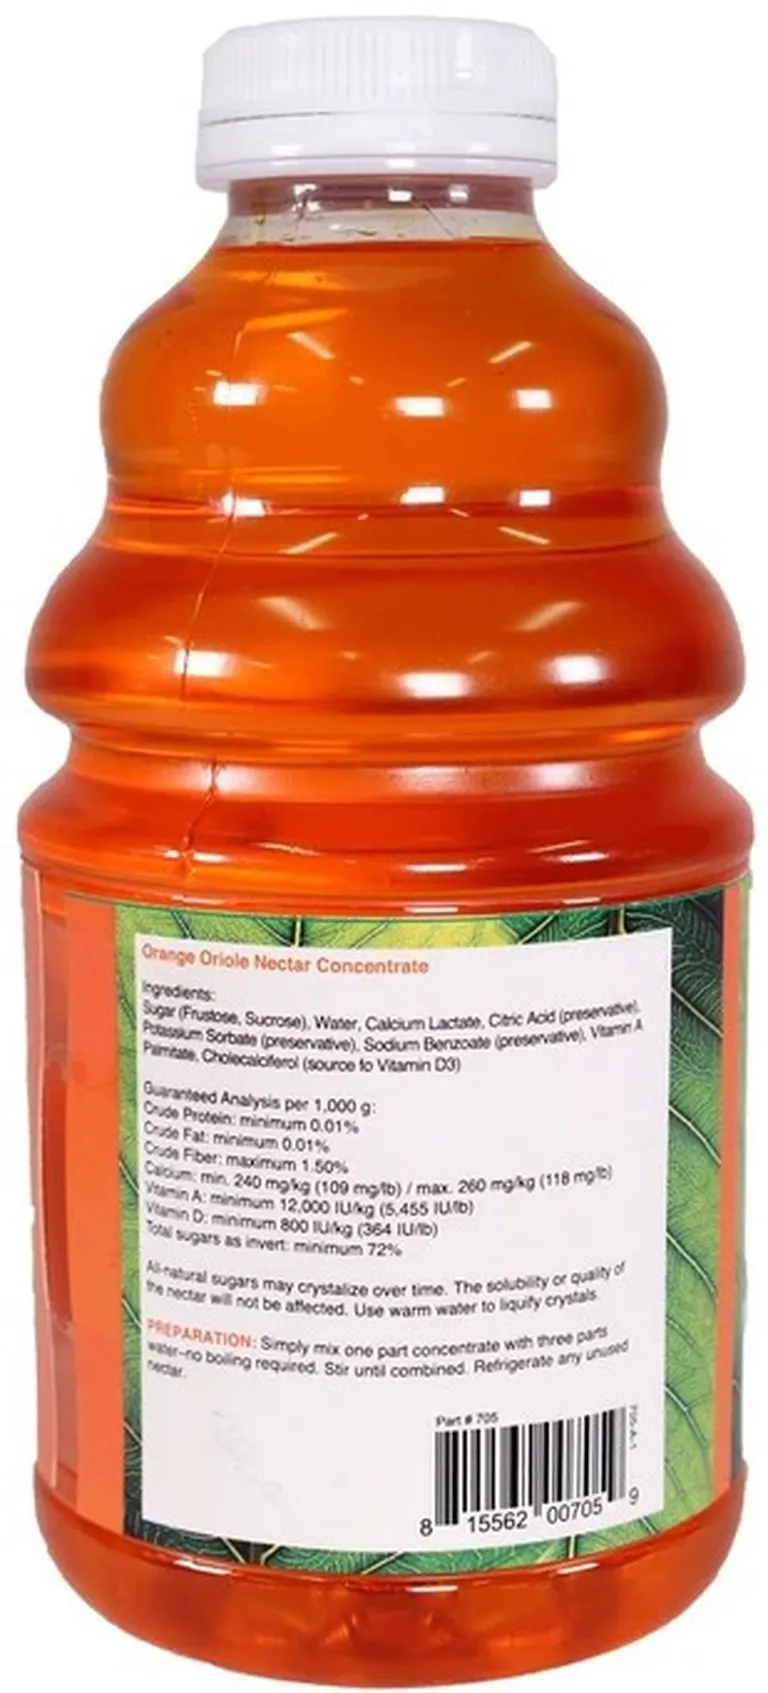 More Birds Health Plus Natural Orange Oriole Nectar Concentrate Photo 3